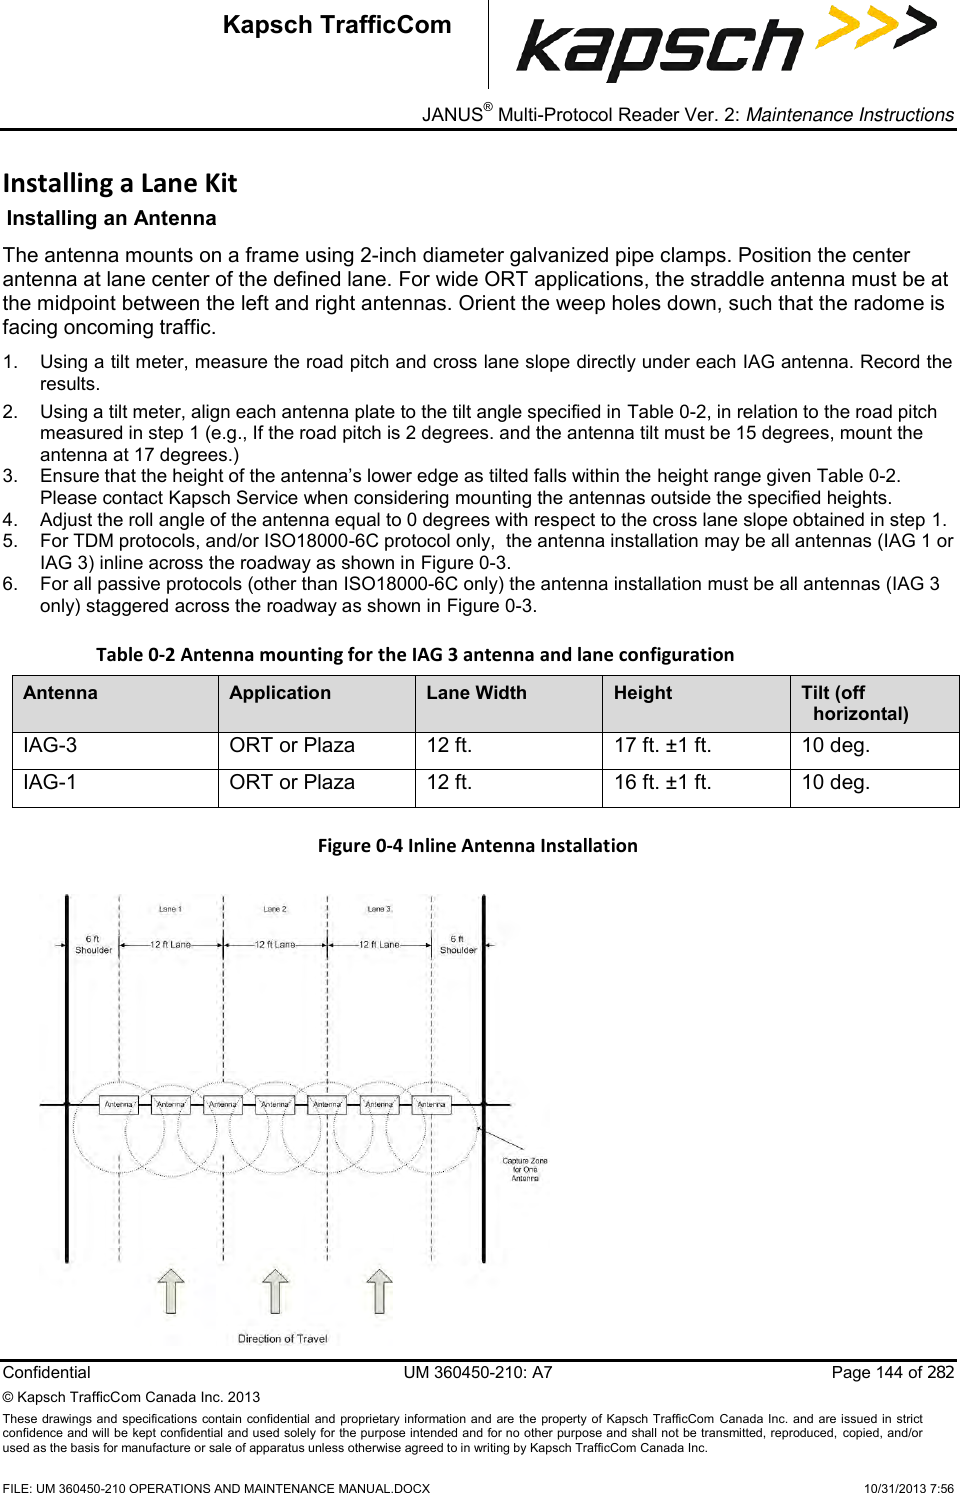 _ JANUS® Multi-Protocol Reader Ver. 2: Maintenance Instructions  Confidential  UM 360450-210: A7  Page 144 of 282 © Kapsch TrafficCom Canada Inc. 2013 These  drawings and specifications  contain confidential and proprietary information and are the property of Kapsch TrafficCom  Canada Inc.  and are issued in strict confidence and will be kept confidential and used solely for the purpose intended and for no other purpose and shall not be transmitted, reproduced, copied, and/or used as the basis for manufacture or sale of apparatus unless otherwise agreed to in writing by Kapsch TrafficCom Canada Inc.    FILE: UM 360450-210 OPERATIONS AND MAINTENANCE MANUAL.DOCX    10/31/2013 7:56 Kapsch TrafficCom Installing a Lane Kit Installing an Antenna  The antenna mounts on a frame using 2-inch diameter galvanized pipe clamps. Position the center antenna at lane center of the defined lane. For wide ORT applications, the straddle antenna must be at the midpoint between the left and right antennas. Orient the weep holes down, such that the radome is facing oncoming traffic.  1.  Using a tilt meter, measure the road pitch and cross lane slope directly under each IAG antenna. Record the results.  2.  Using a tilt meter, align each antenna plate to the tilt angle specified in Table 0-2, in relation to the road pitch measured in step 1 (e.g., If the road pitch is 2 degrees. and the antenna tilt must be 15 degrees, mount the antenna at 17 degrees.) 3.  Ensure that the height of the antenna’s lower edge as tilted falls within the height range given Table 0-2. Please contact Kapsch Service when considering mounting the antennas outside the specified heights. 4.  Adjust the roll angle of the antenna equal to 0 degrees with respect to the cross lane slope obtained in step 1. 5.  For TDM protocols, and/or ISO18000-6C protocol only,  the antenna installation may be all antennas (IAG 1 or IAG 3) inline across the roadway as shown in Figure 0-3. 6.  For all passive protocols (other than ISO18000-6C only) the antenna installation must be all antennas (IAG 3 only) staggered across the roadway as shown in Figure 0-3. Table 0-2 Antenna mounting for the IAG 3 antenna and lane configuration Antenna Application Lane Width Height Tilt (off horizontal) IAG-3 ORT or Plaza 12 ft. 17 ft. ±1 ft. 10 deg. IAG-1 ORT or Plaza 12 ft. 16 ft. ±1 ft. 10 deg. Figure 0-4 Inline Antenna Installation   